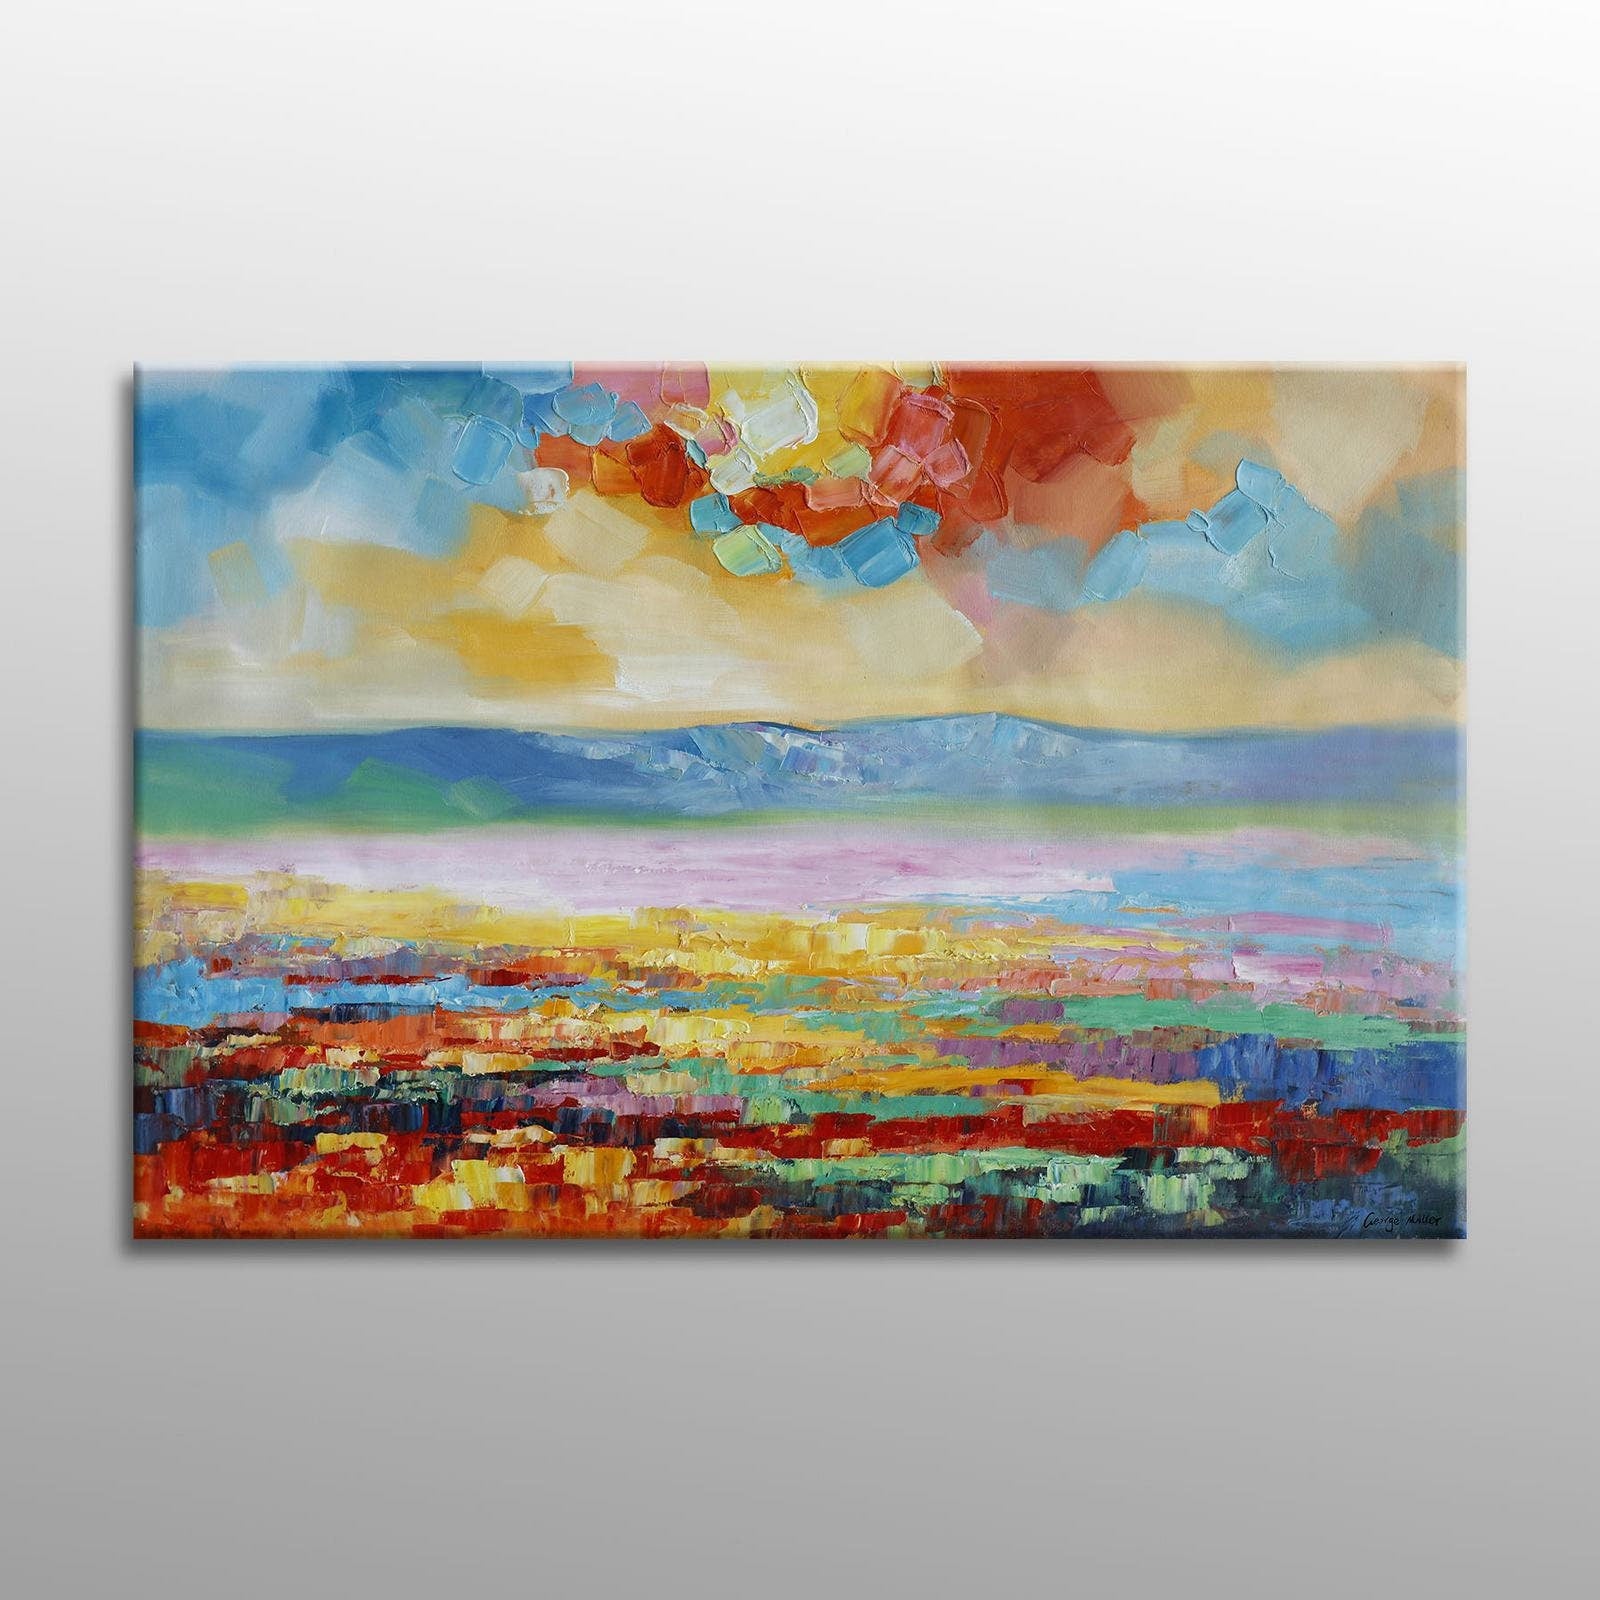 Abstract Landscape Oil Painting, Canvas Painting, Oil On Canvas Painting, Landscape, Large Painting, Handmade, Contemporary Art, Textured